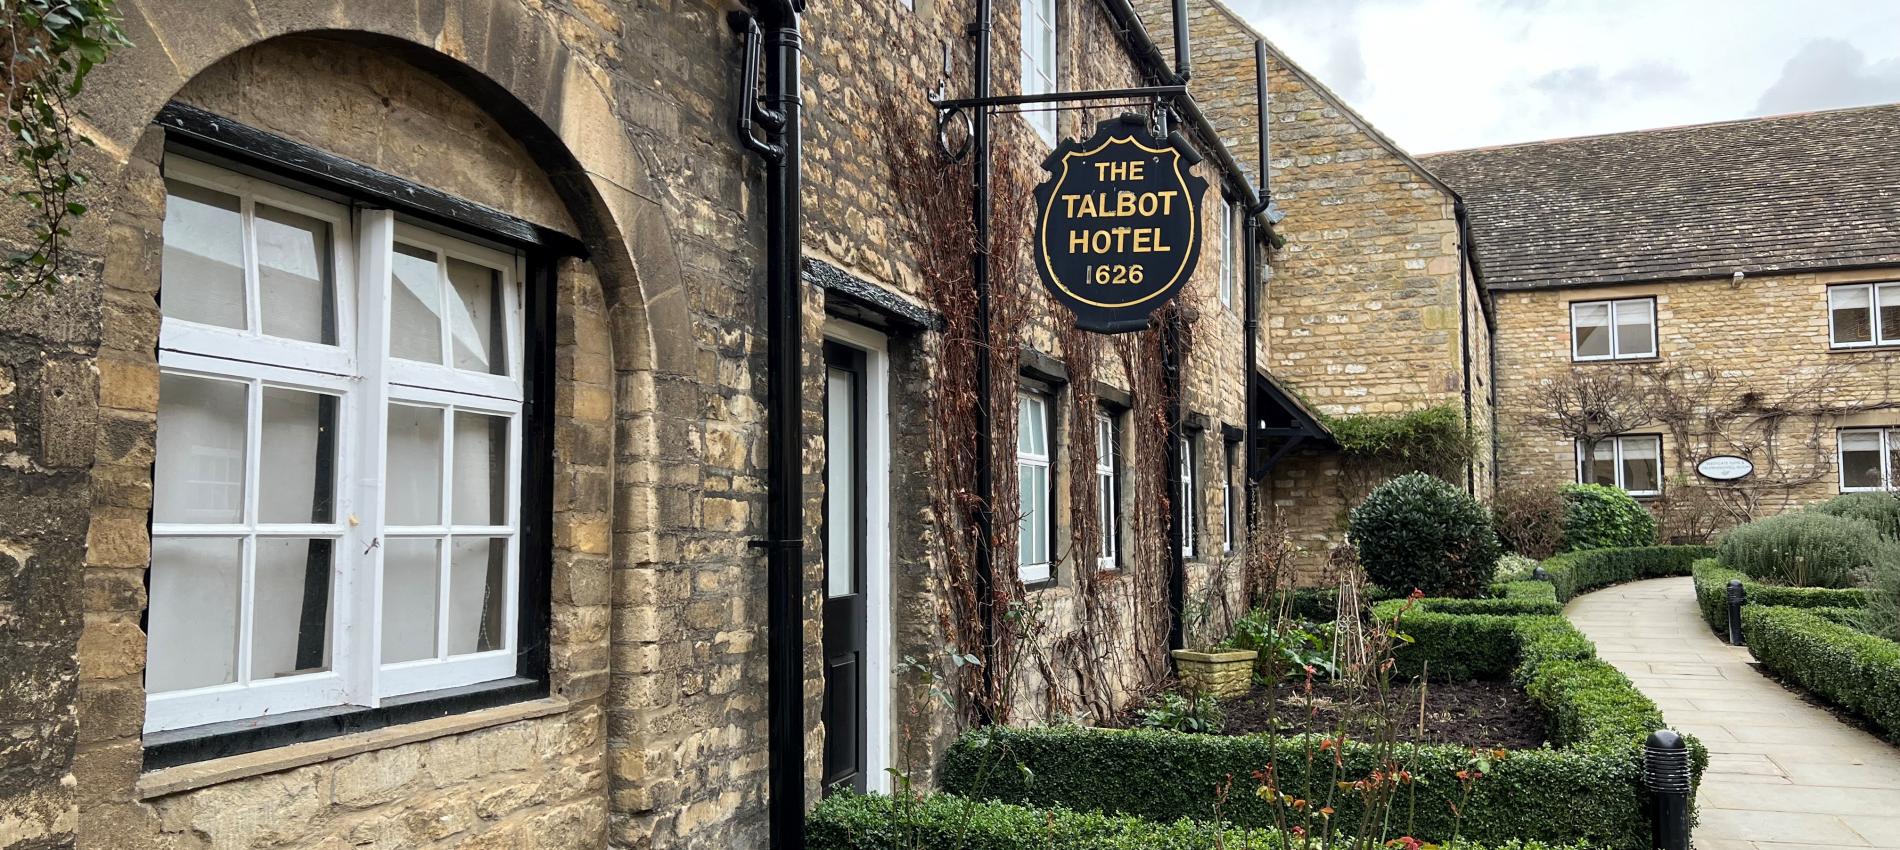 The Talbot Hotel in Oundle